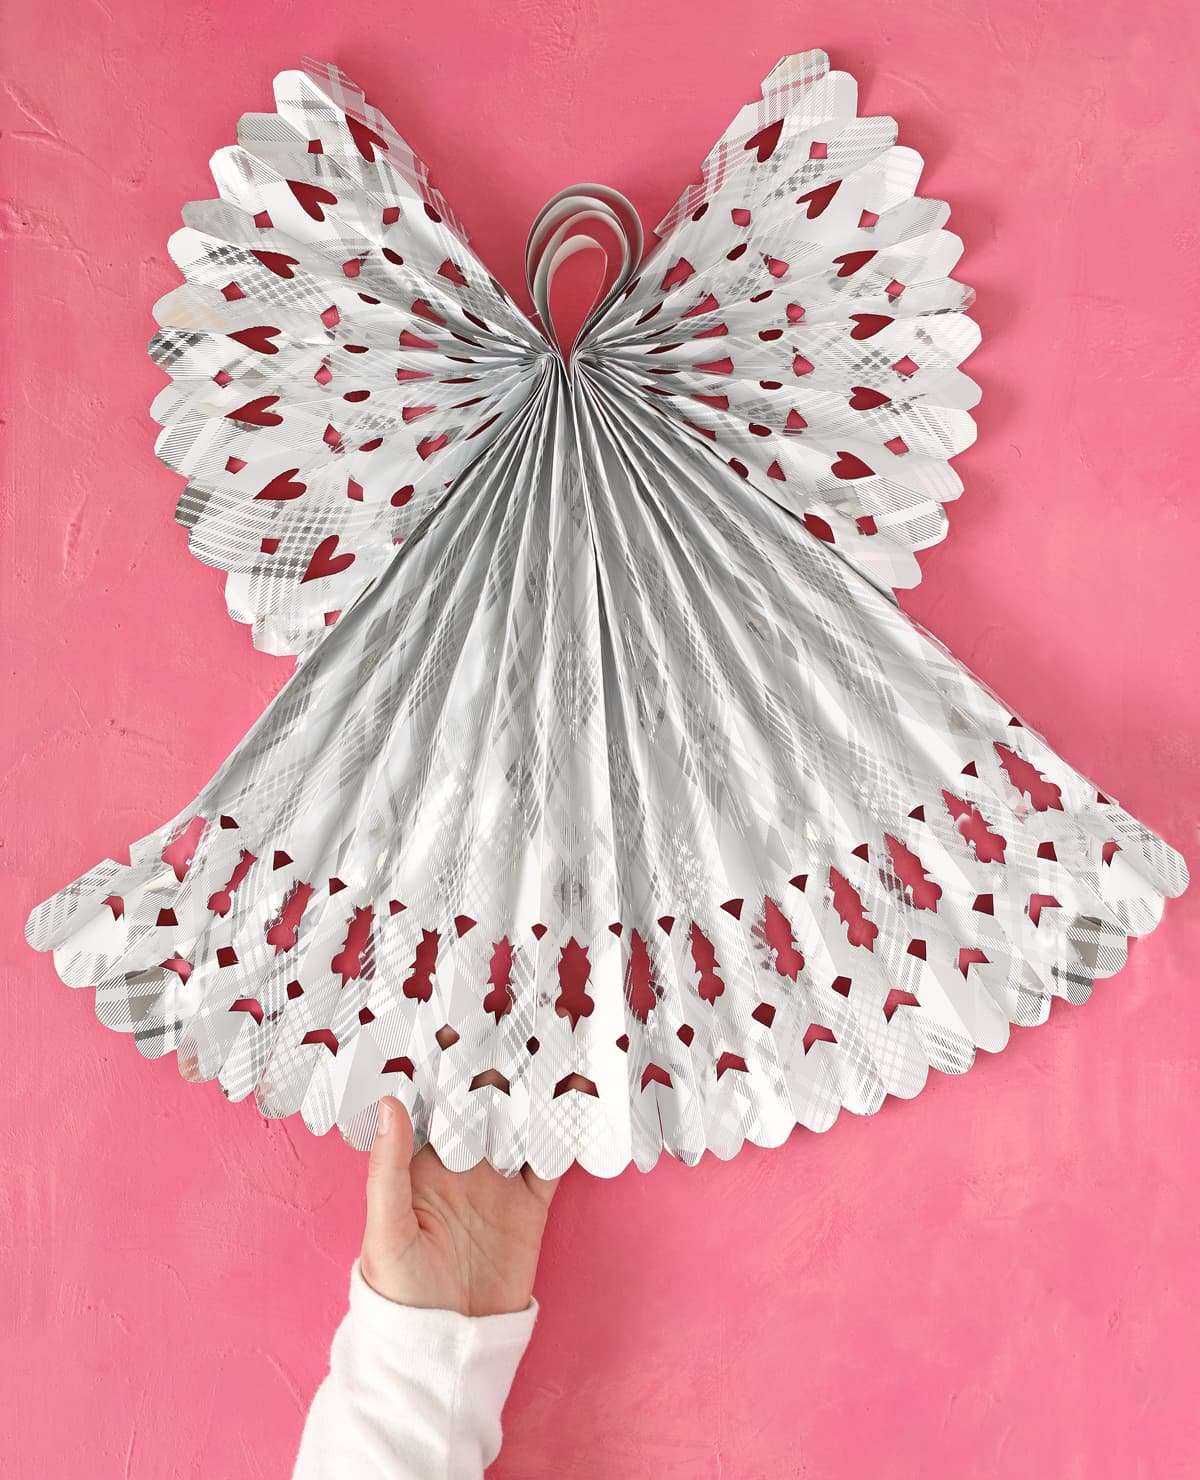 How to Make Paper Christmas Angels